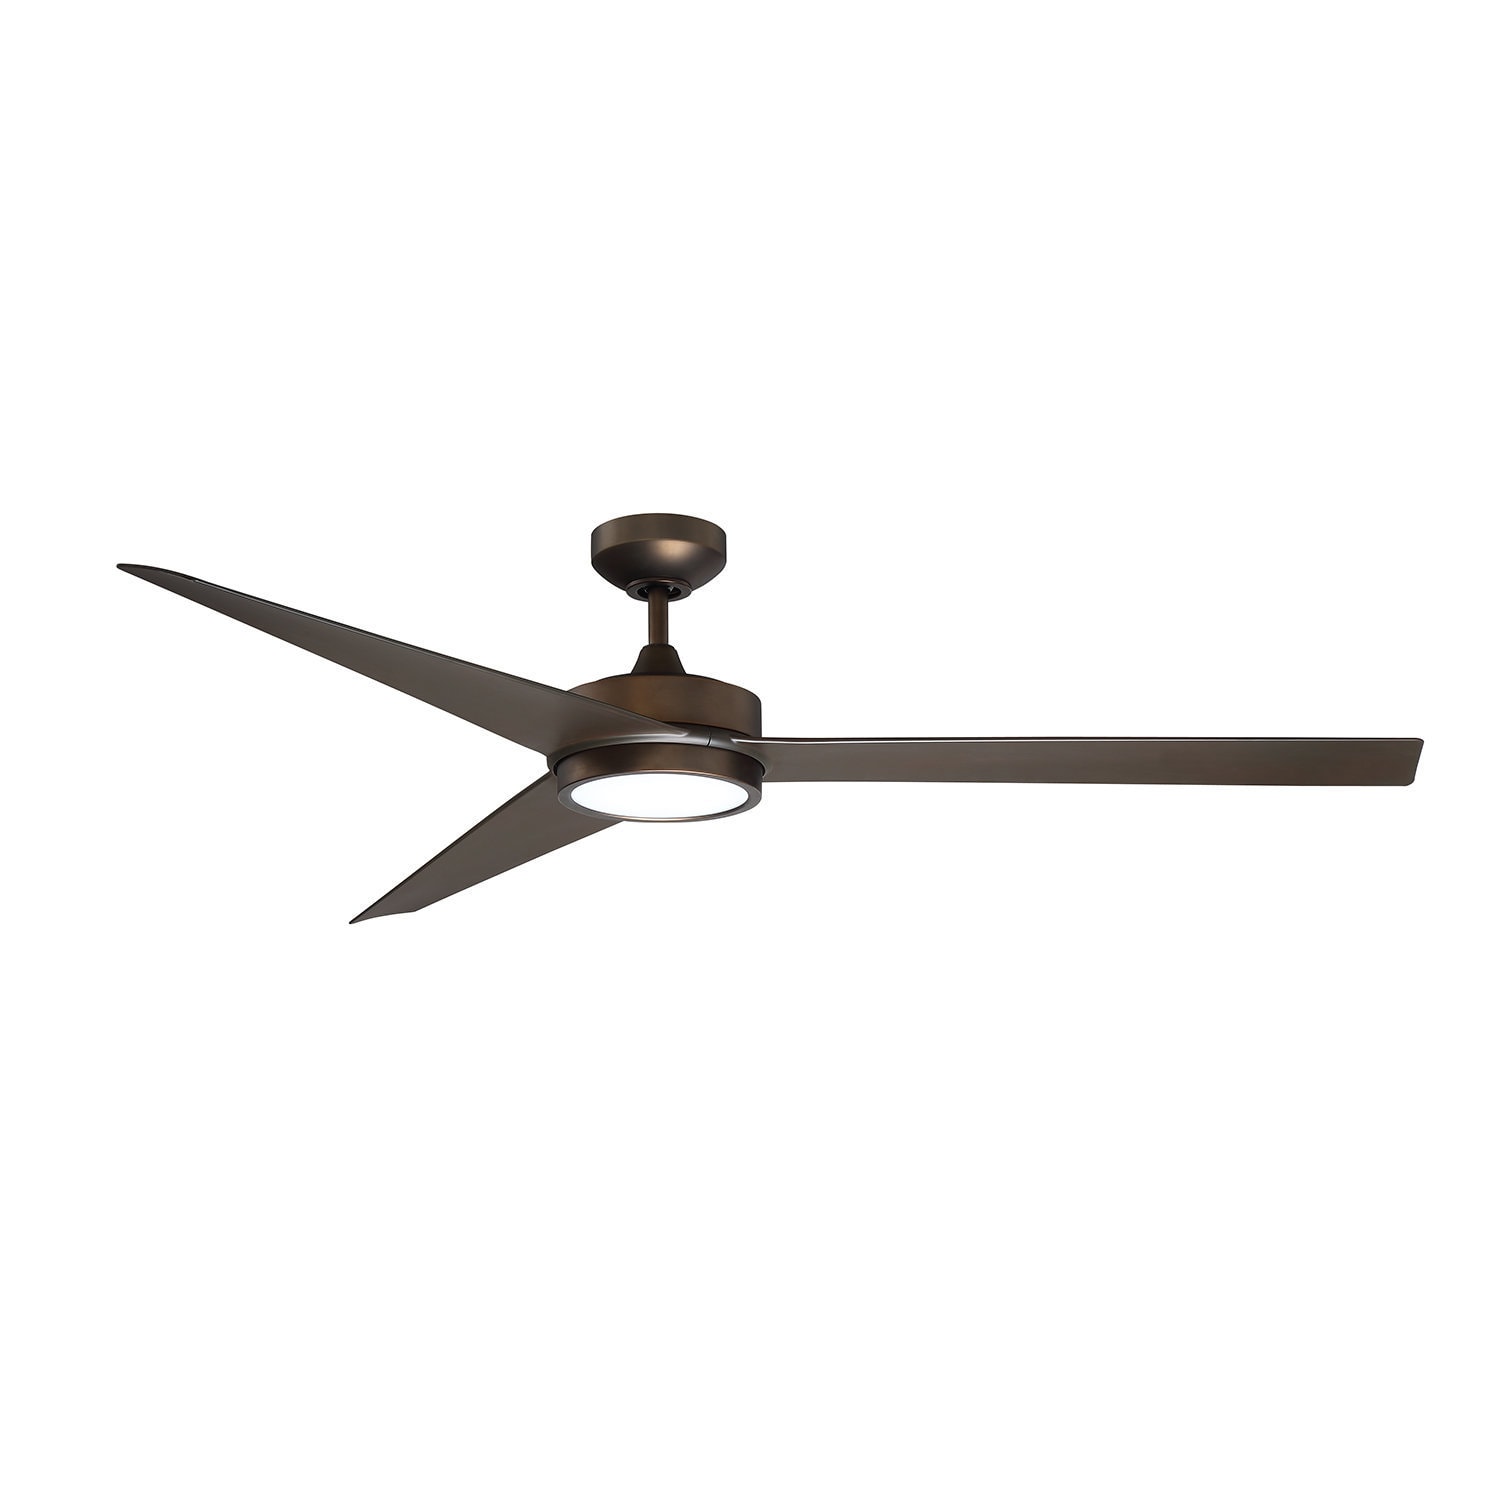 Triceptor Architectural Bronze 60-inch LED DC Motor Ceiling Fan